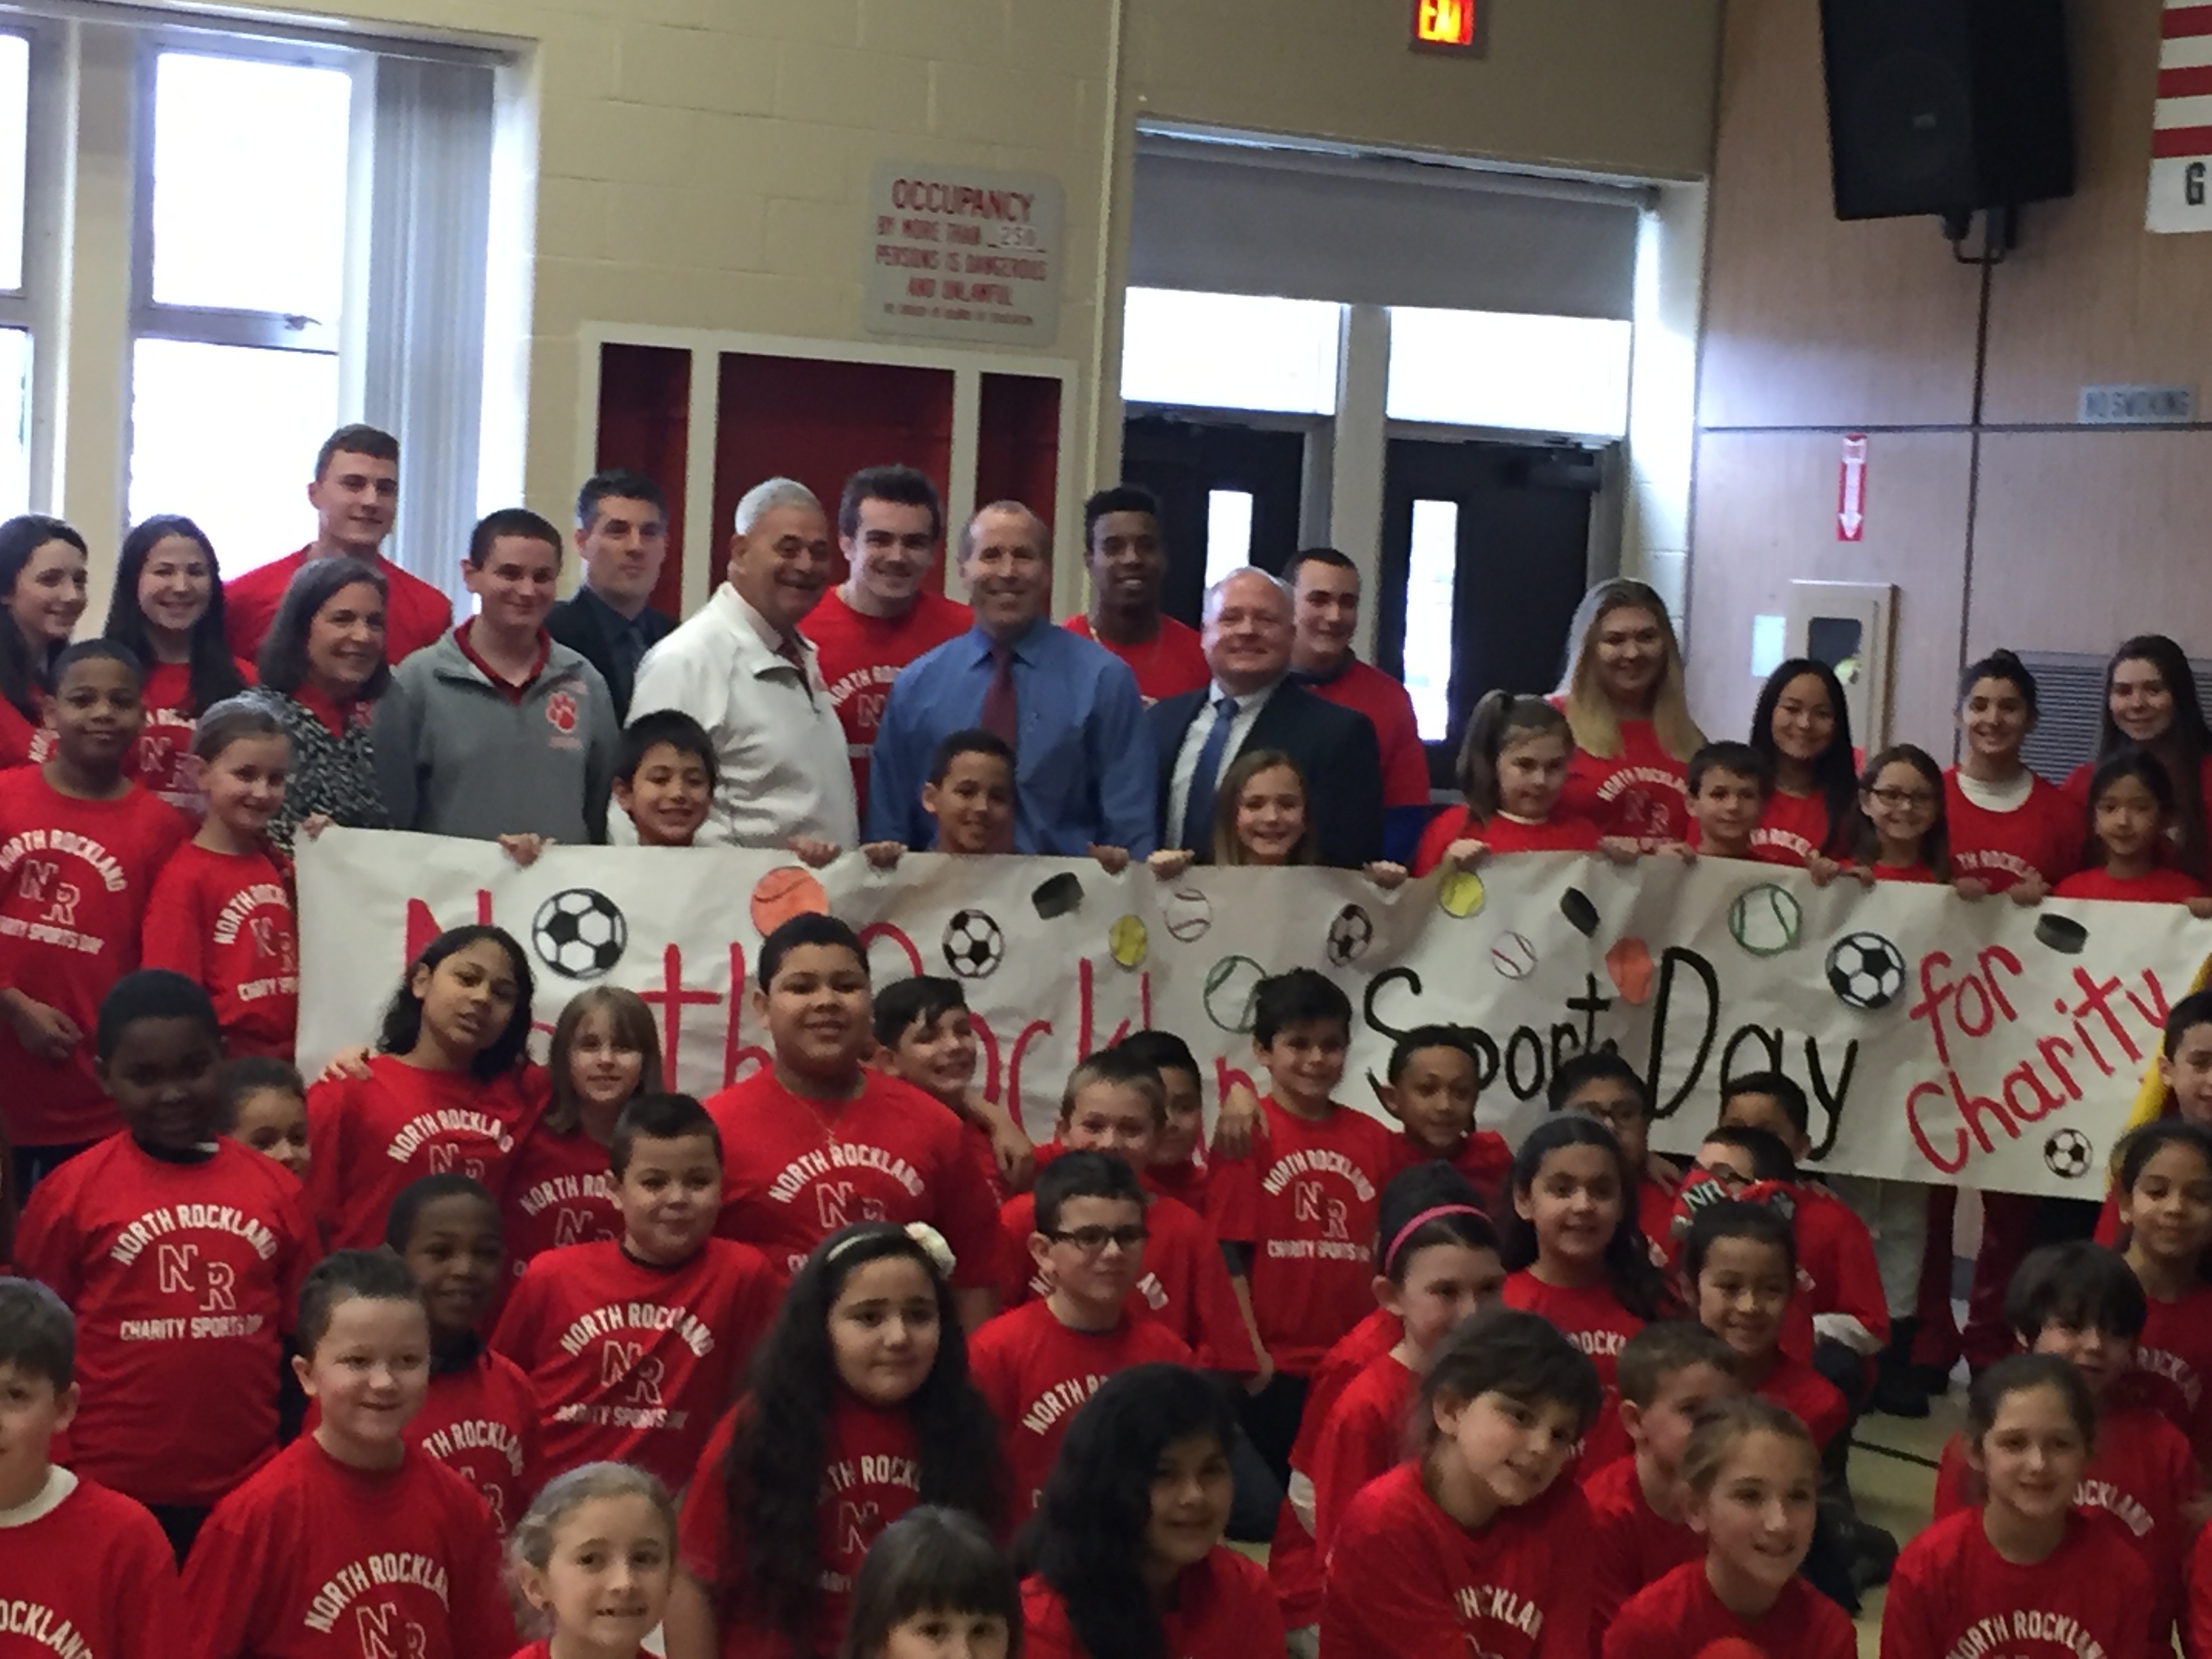 Supervisor Jim Monaghan attends the North Rockland Sports Day for Charity Kickoff Event at Stony Point Elementary School